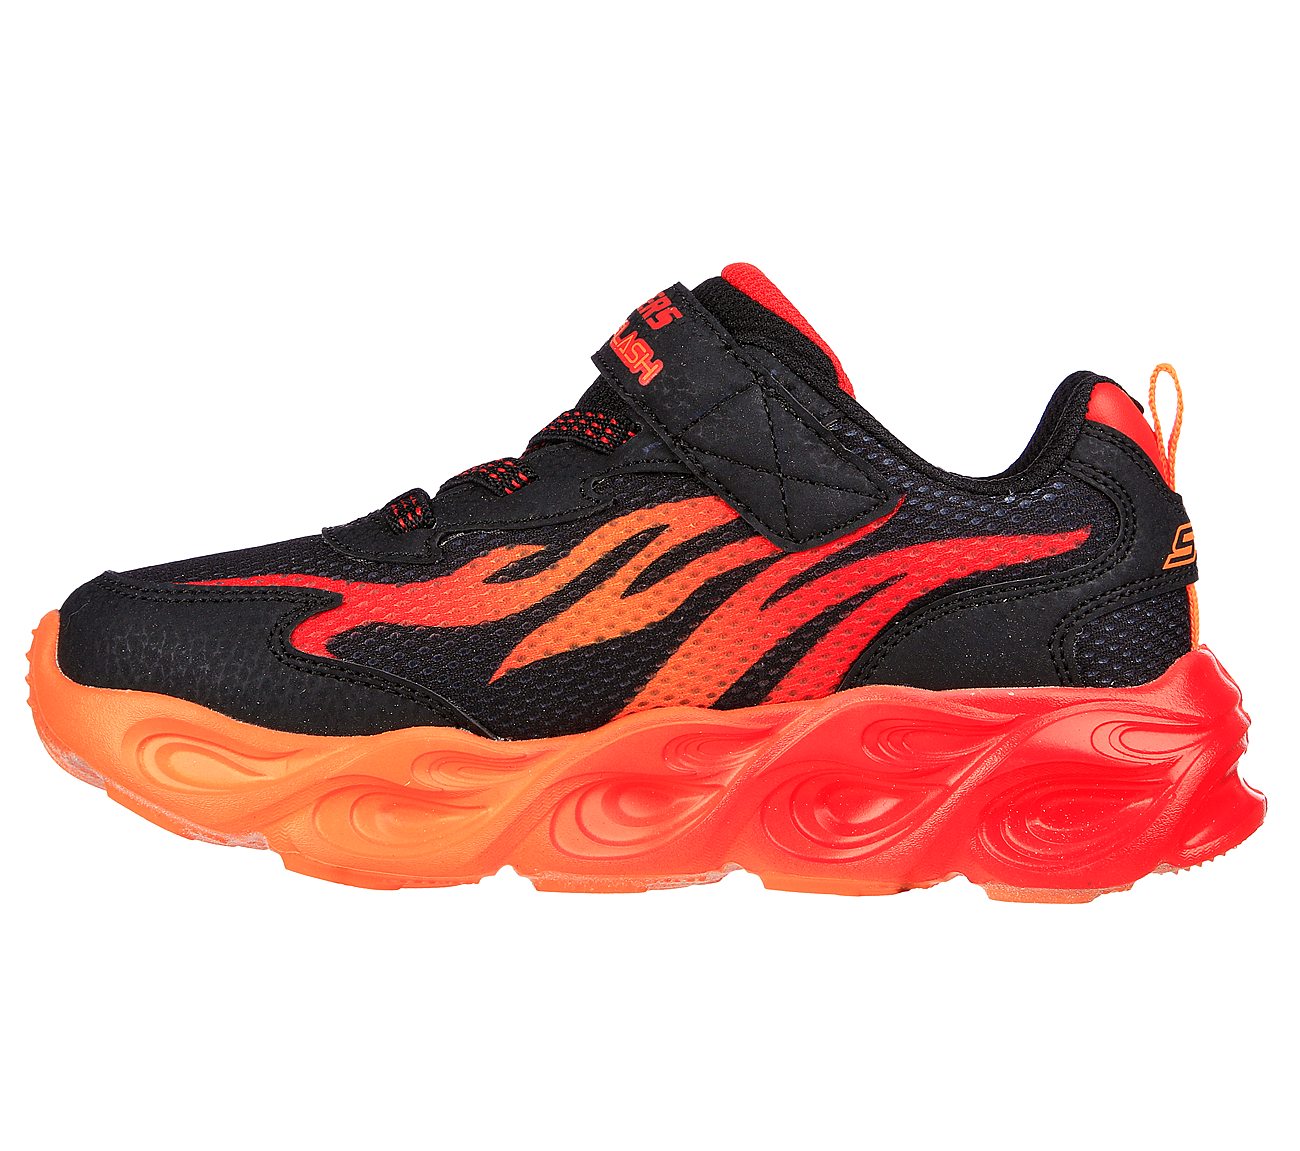 THERMO-FLASH - HEAT-FLUX, BLACK/RED Footwear Left View